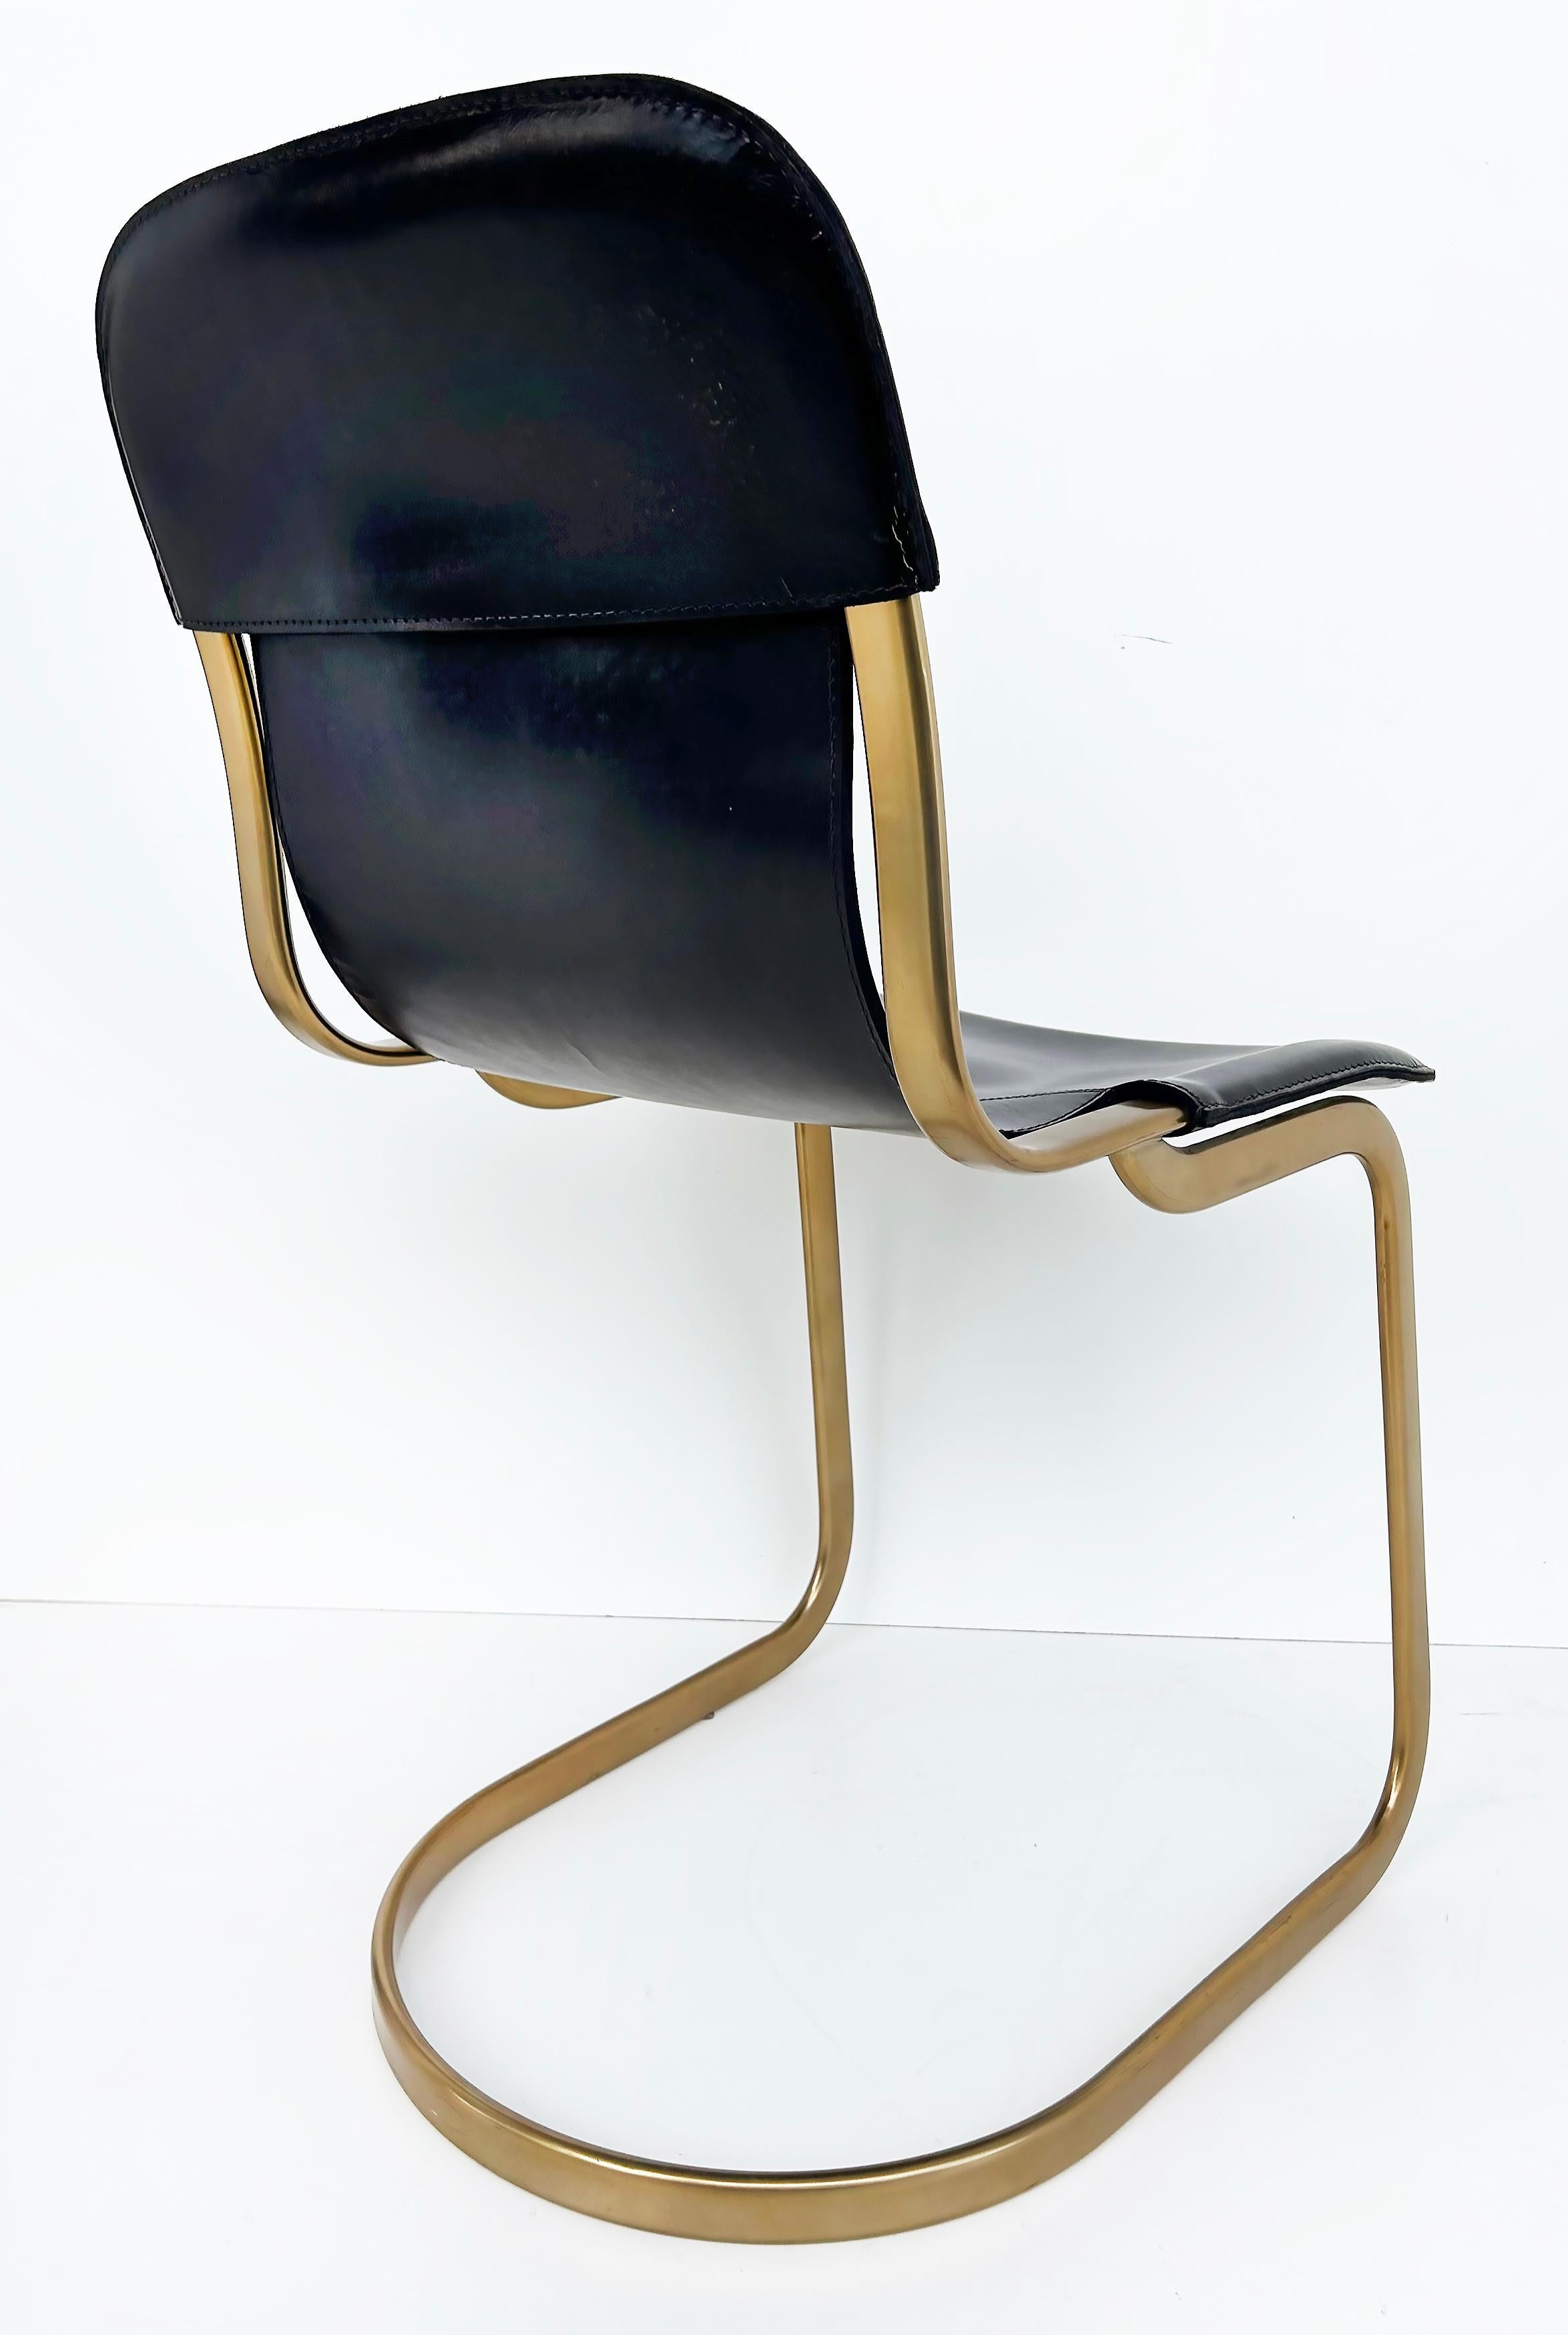 Contemporary Brass Plated Leather Cantilevered Dining Chairs After Willy Rizzo Desgn For Sale